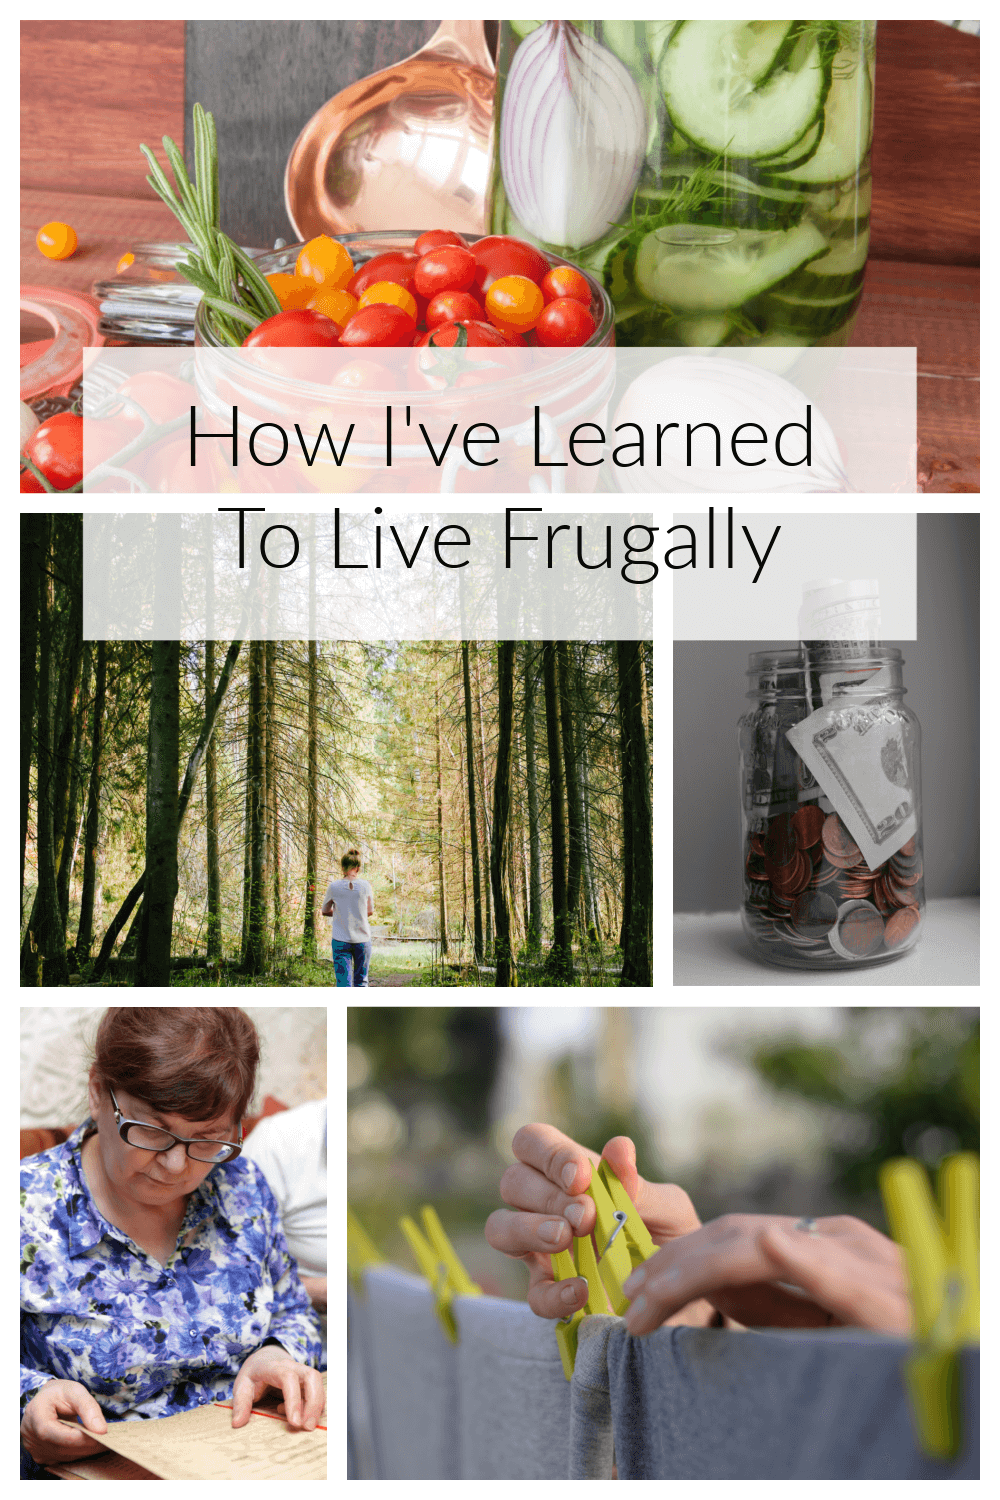 In How I've Learned To Live Frugally, these are ways I thought of to save money.